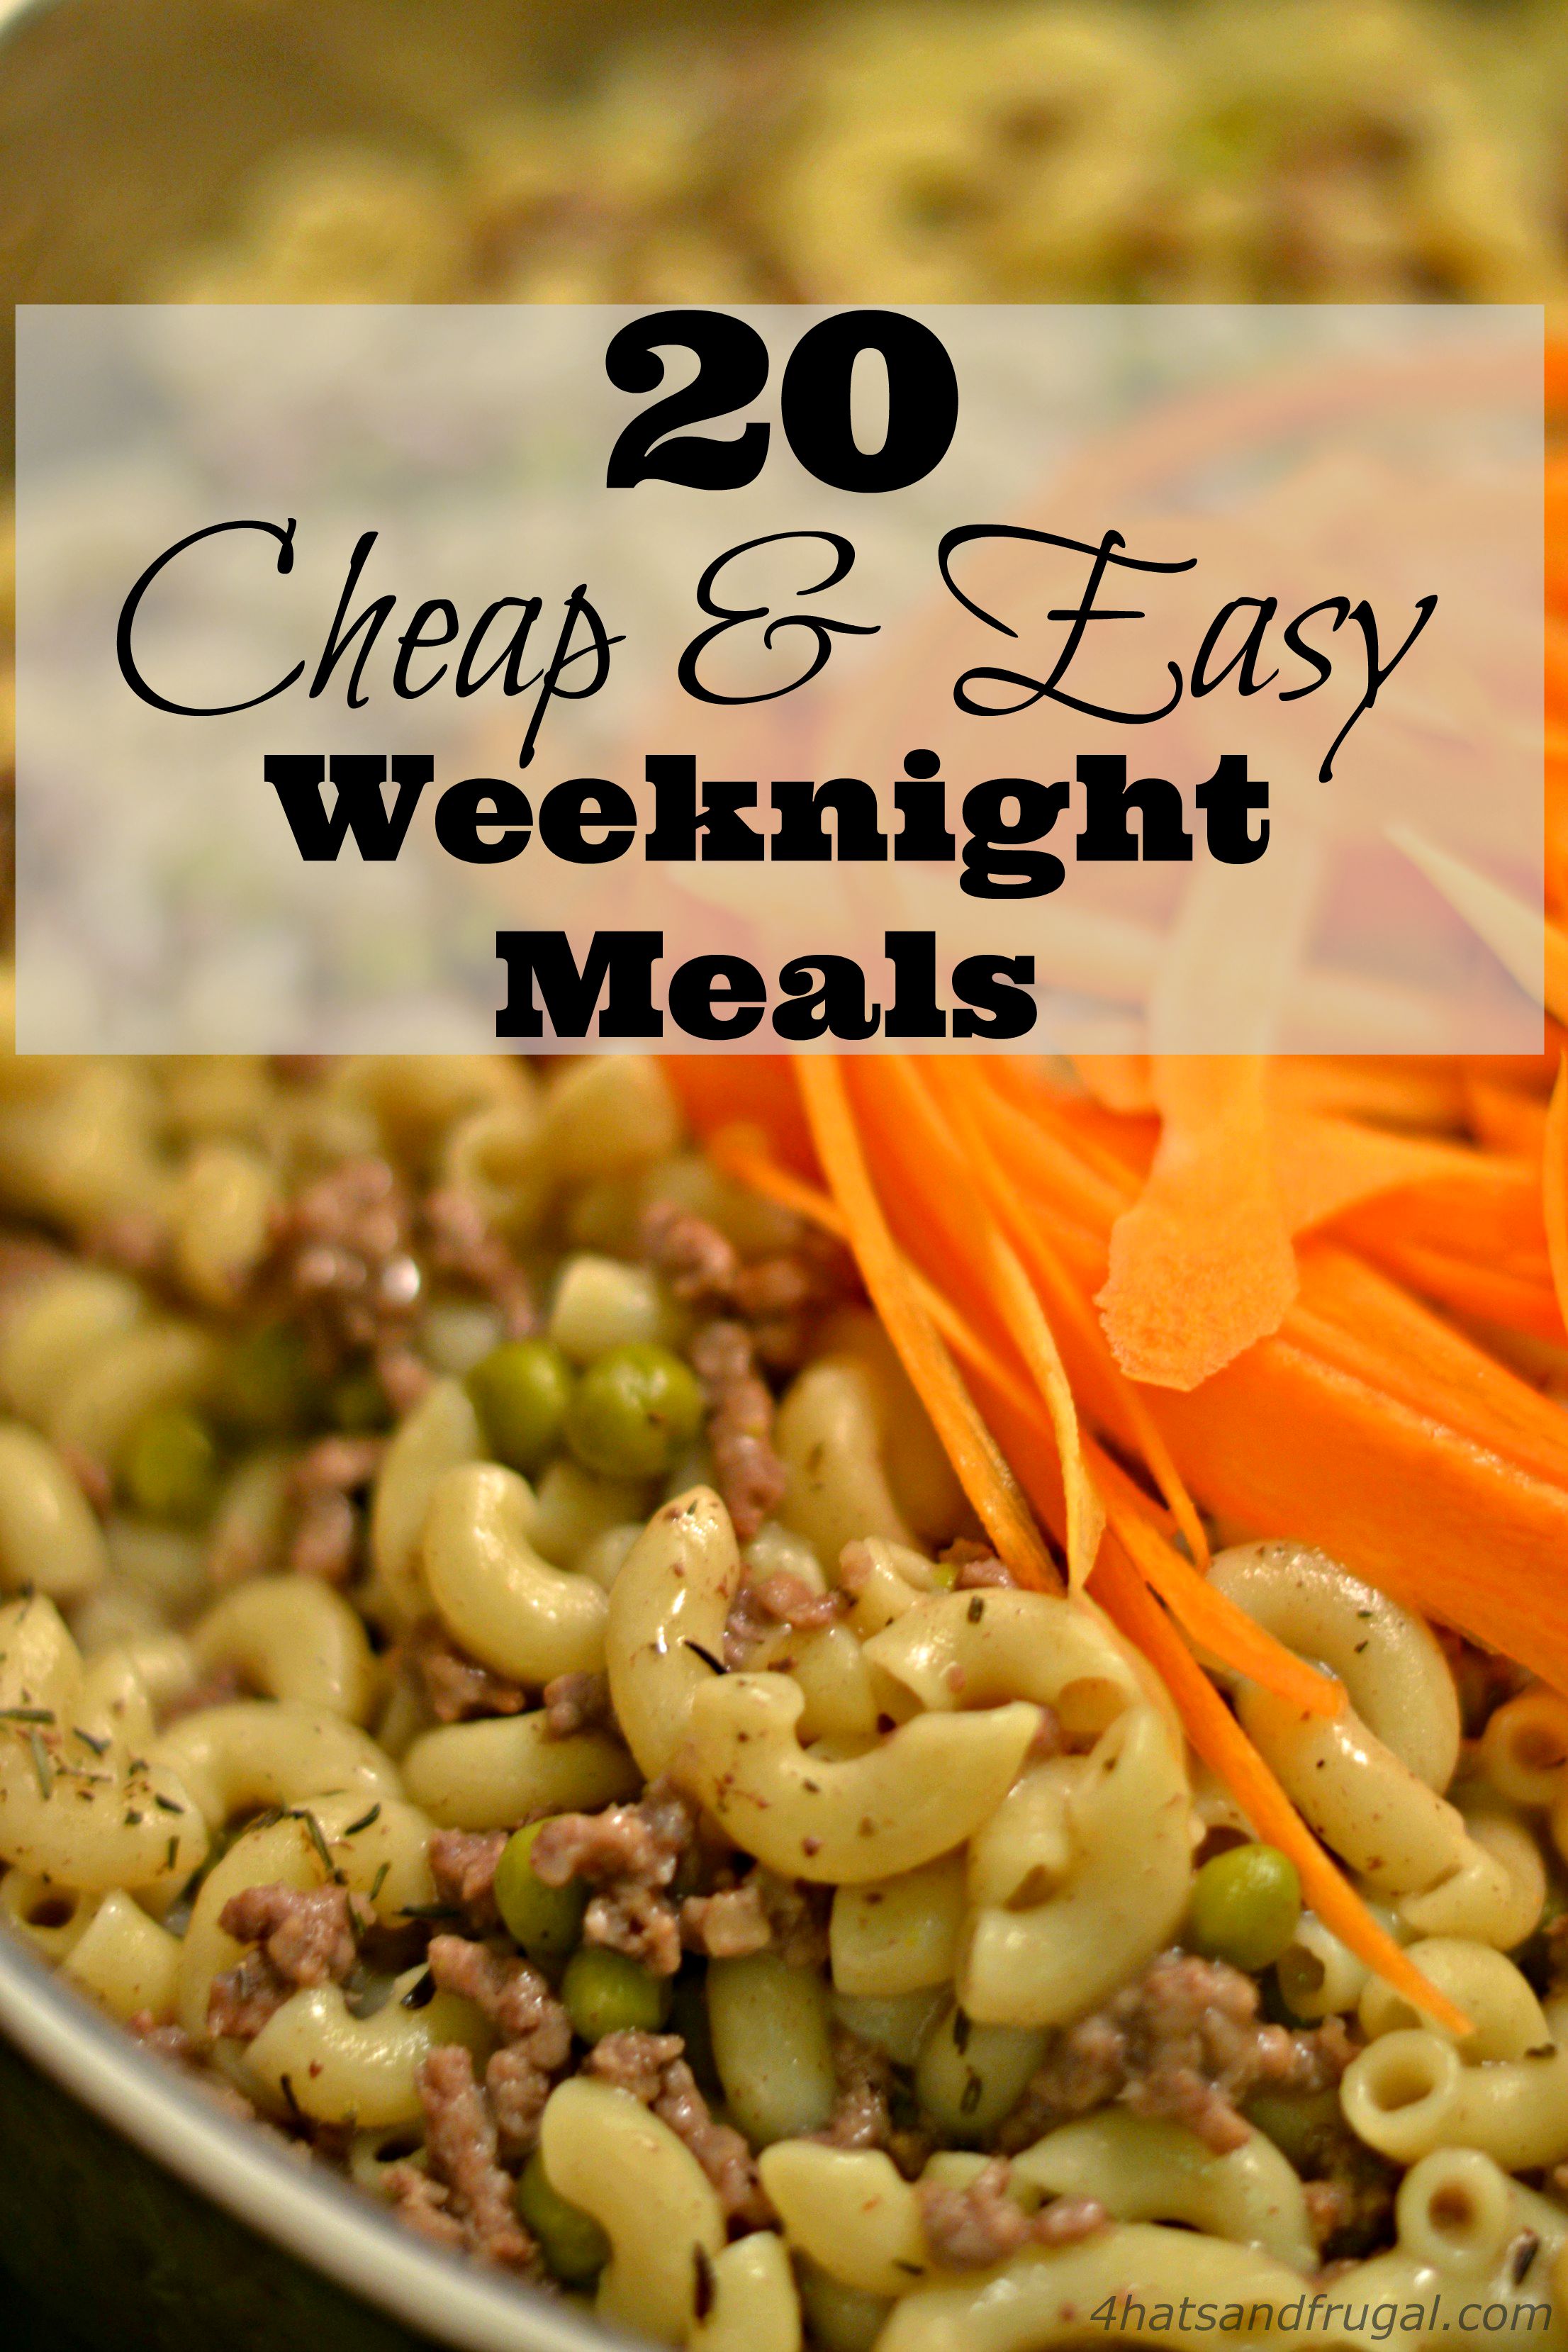 20+ Cheap & Easy Weeknight Meals - 4 Hats and Frugal